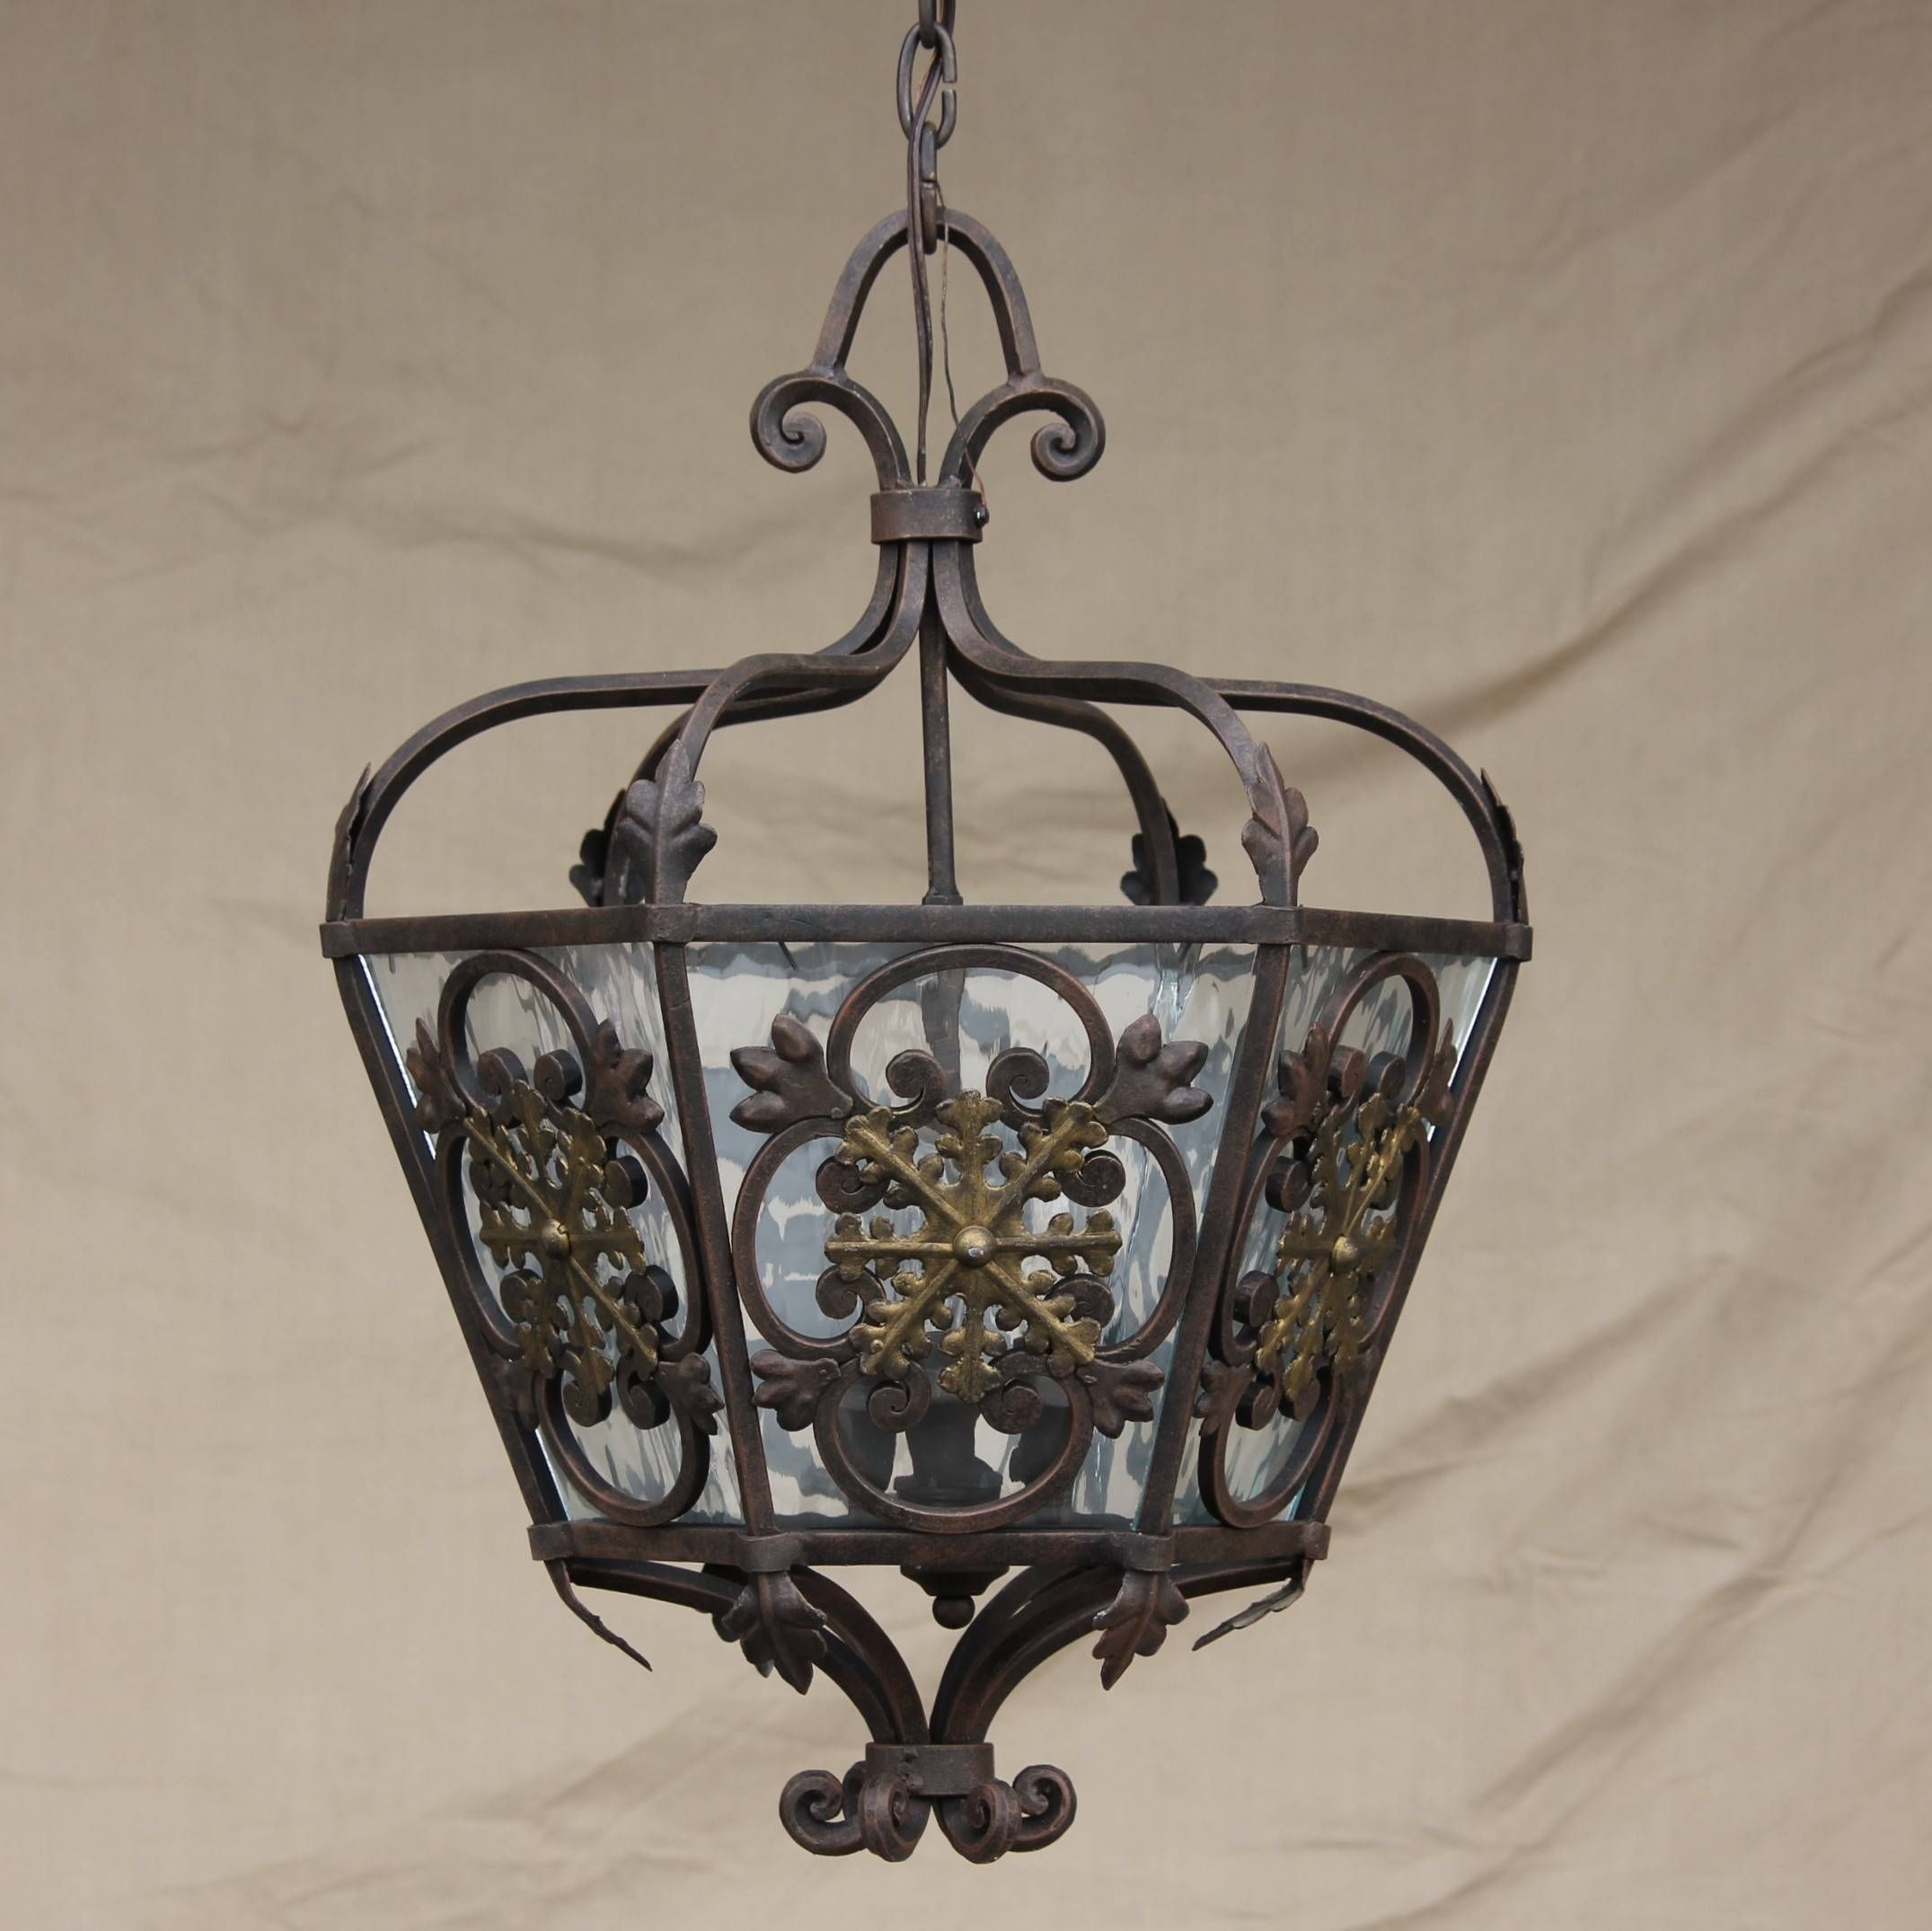 Black Wrought Iron Lighting Fixtures | Advice For Your Home Decoration Within Black Wrought Iron Pendant Lights (View 8 of 15)